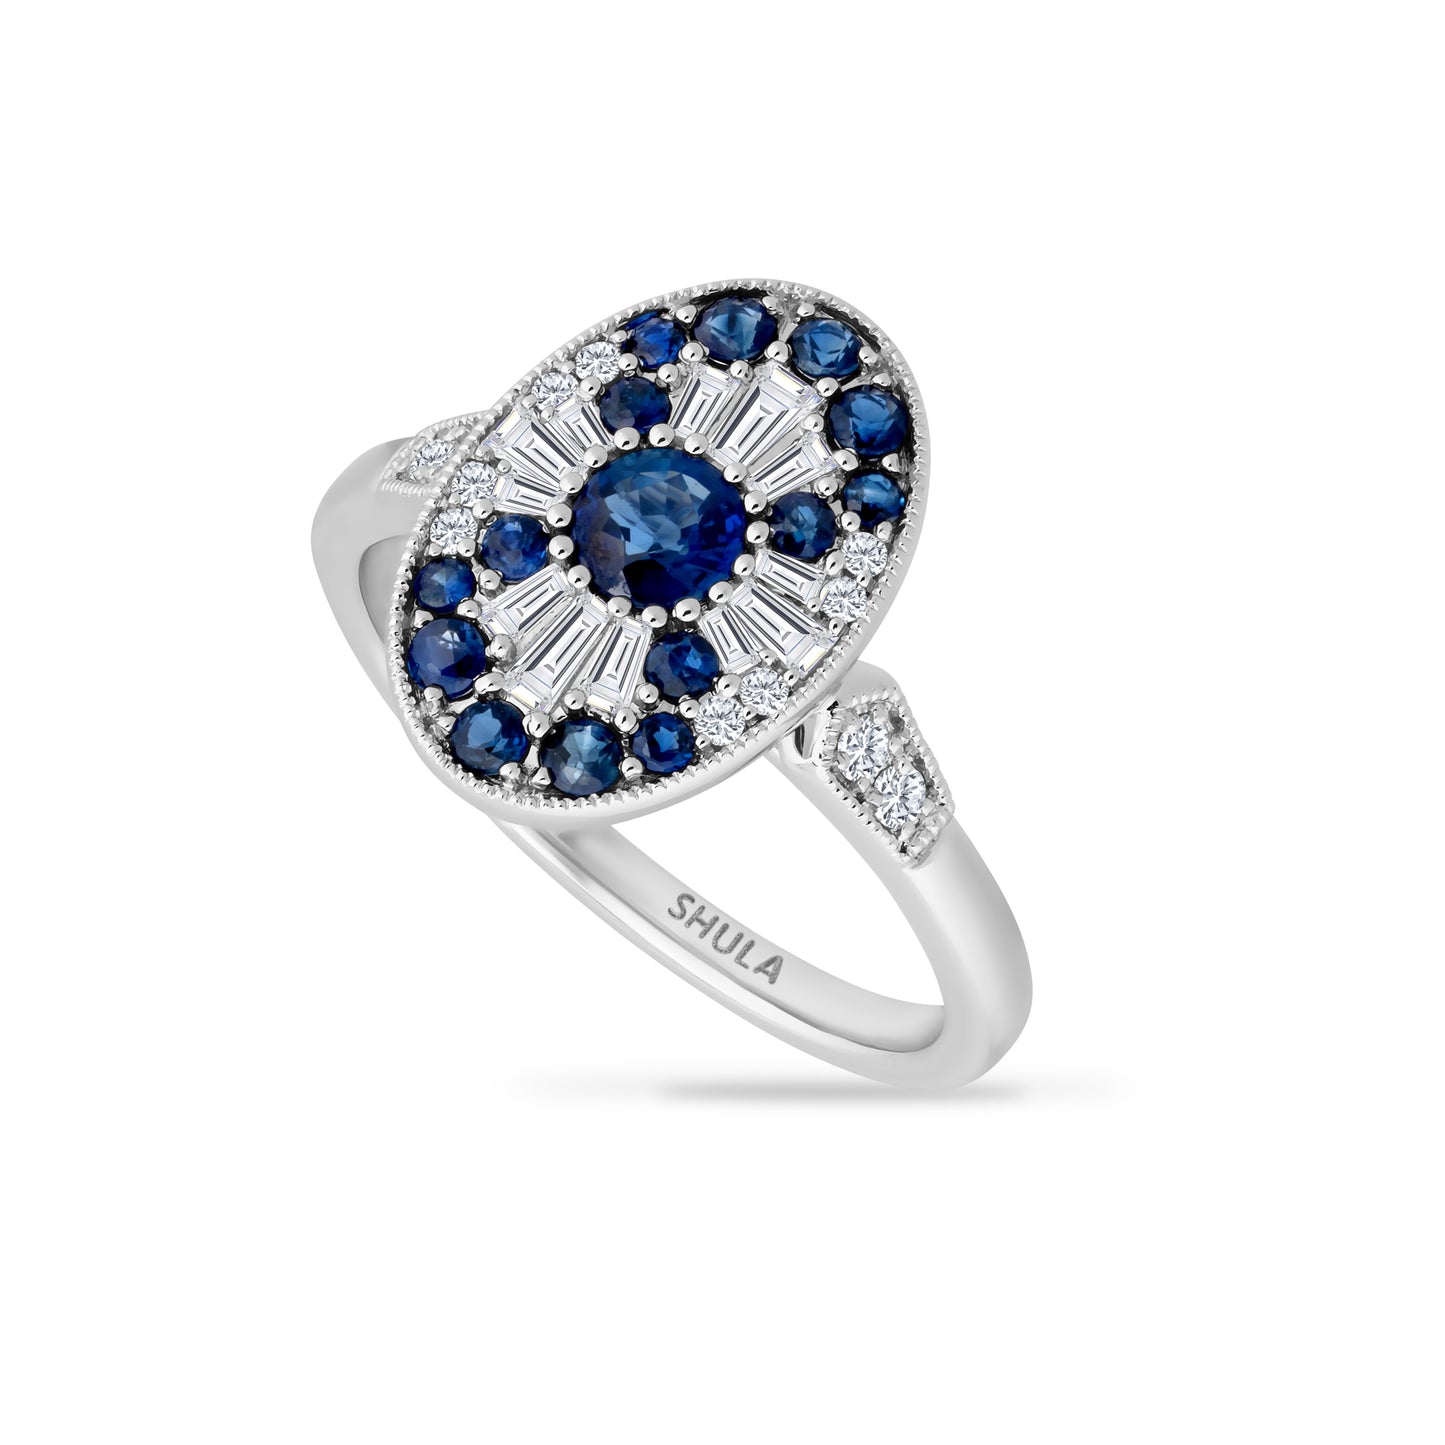 14KW RING WITH 12 ROUND DIAMONDS 0.09CT, 12 BAGUETTE DIAMONDS 0.16CT, & 15 BLUE SAPPHIRES 0.78CT